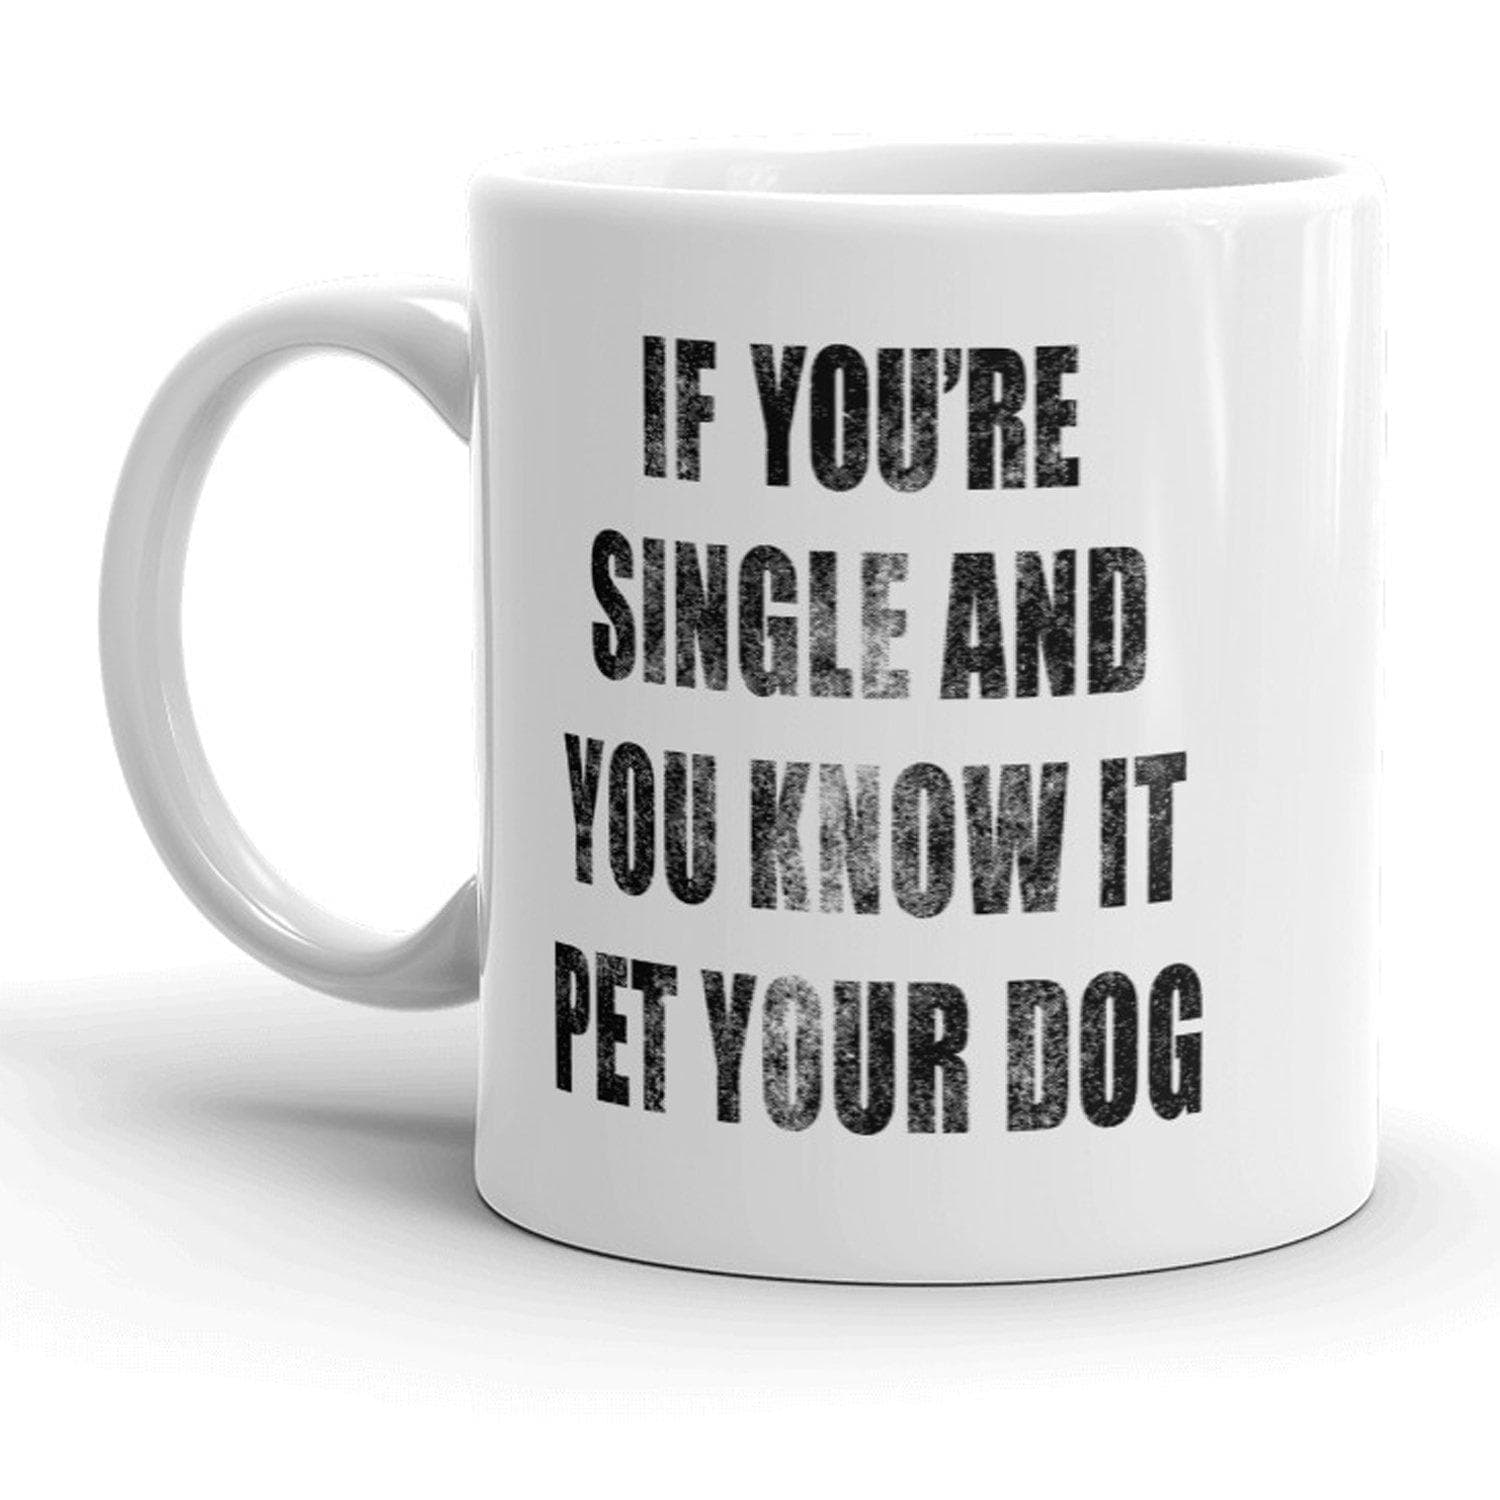 If Youre Single And You Know It Pet Your Dog Mug - Crazy Dog T-Shirts